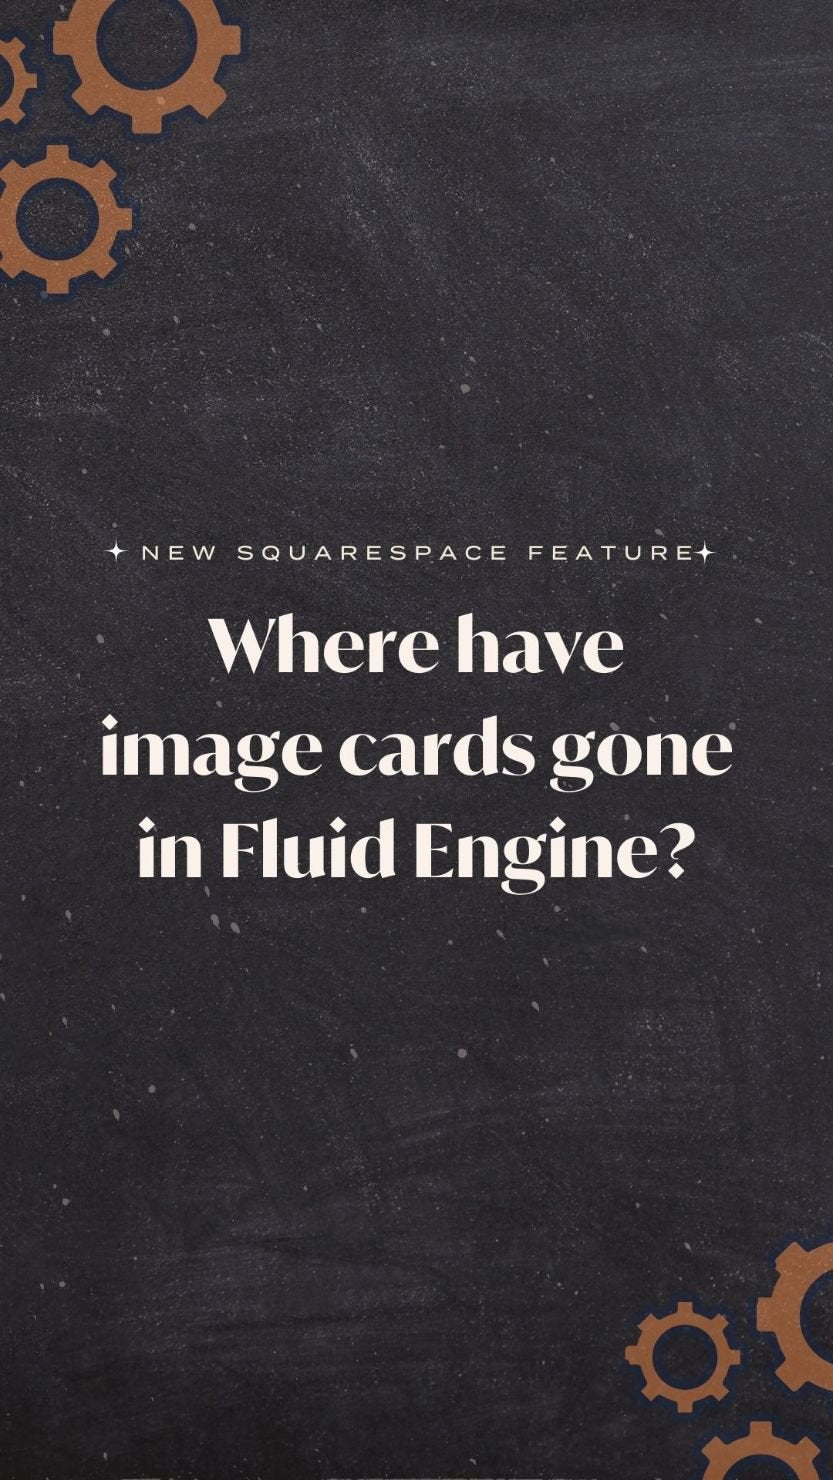 Where have image cards gone in Fluid Engine?